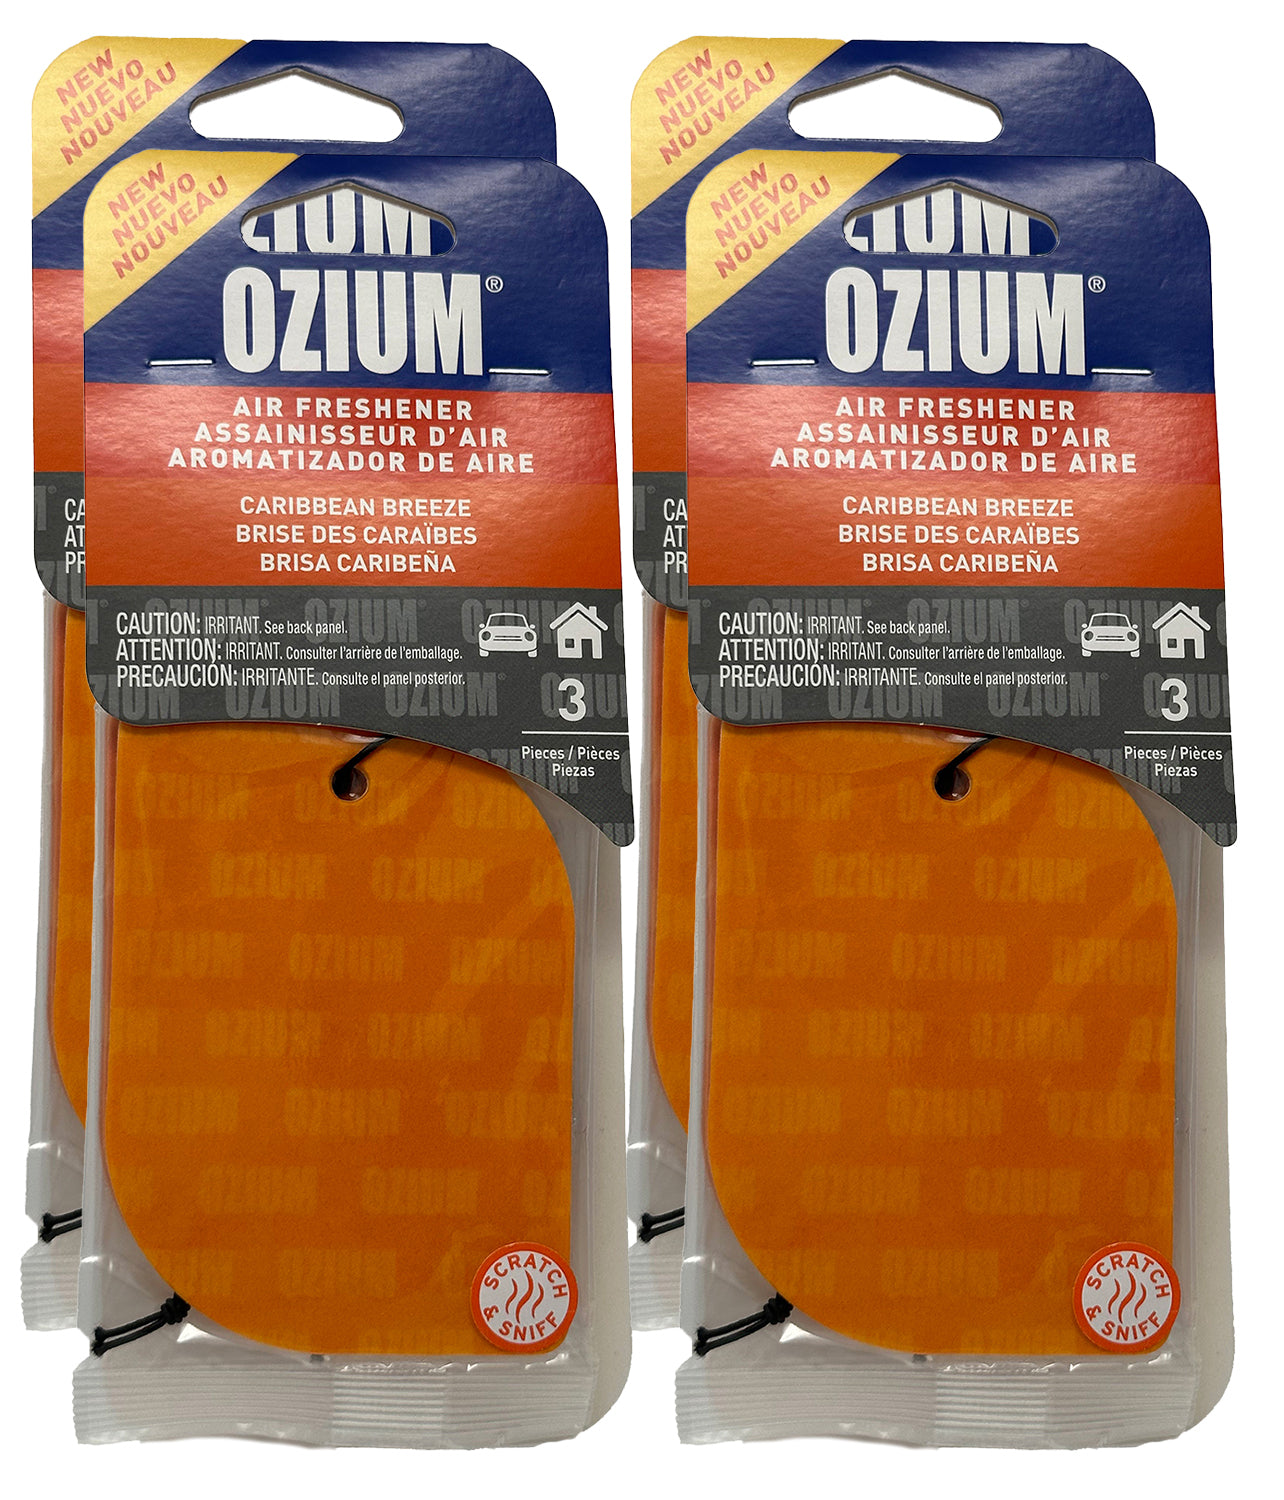 Ozium Paper Hanging Car Air Freshener with Odor Eliminator for Car -  Refresh Your Ride with Automotive Air Fresheners, Caribbean Breeze, 4 Packs  by GOSO Direct